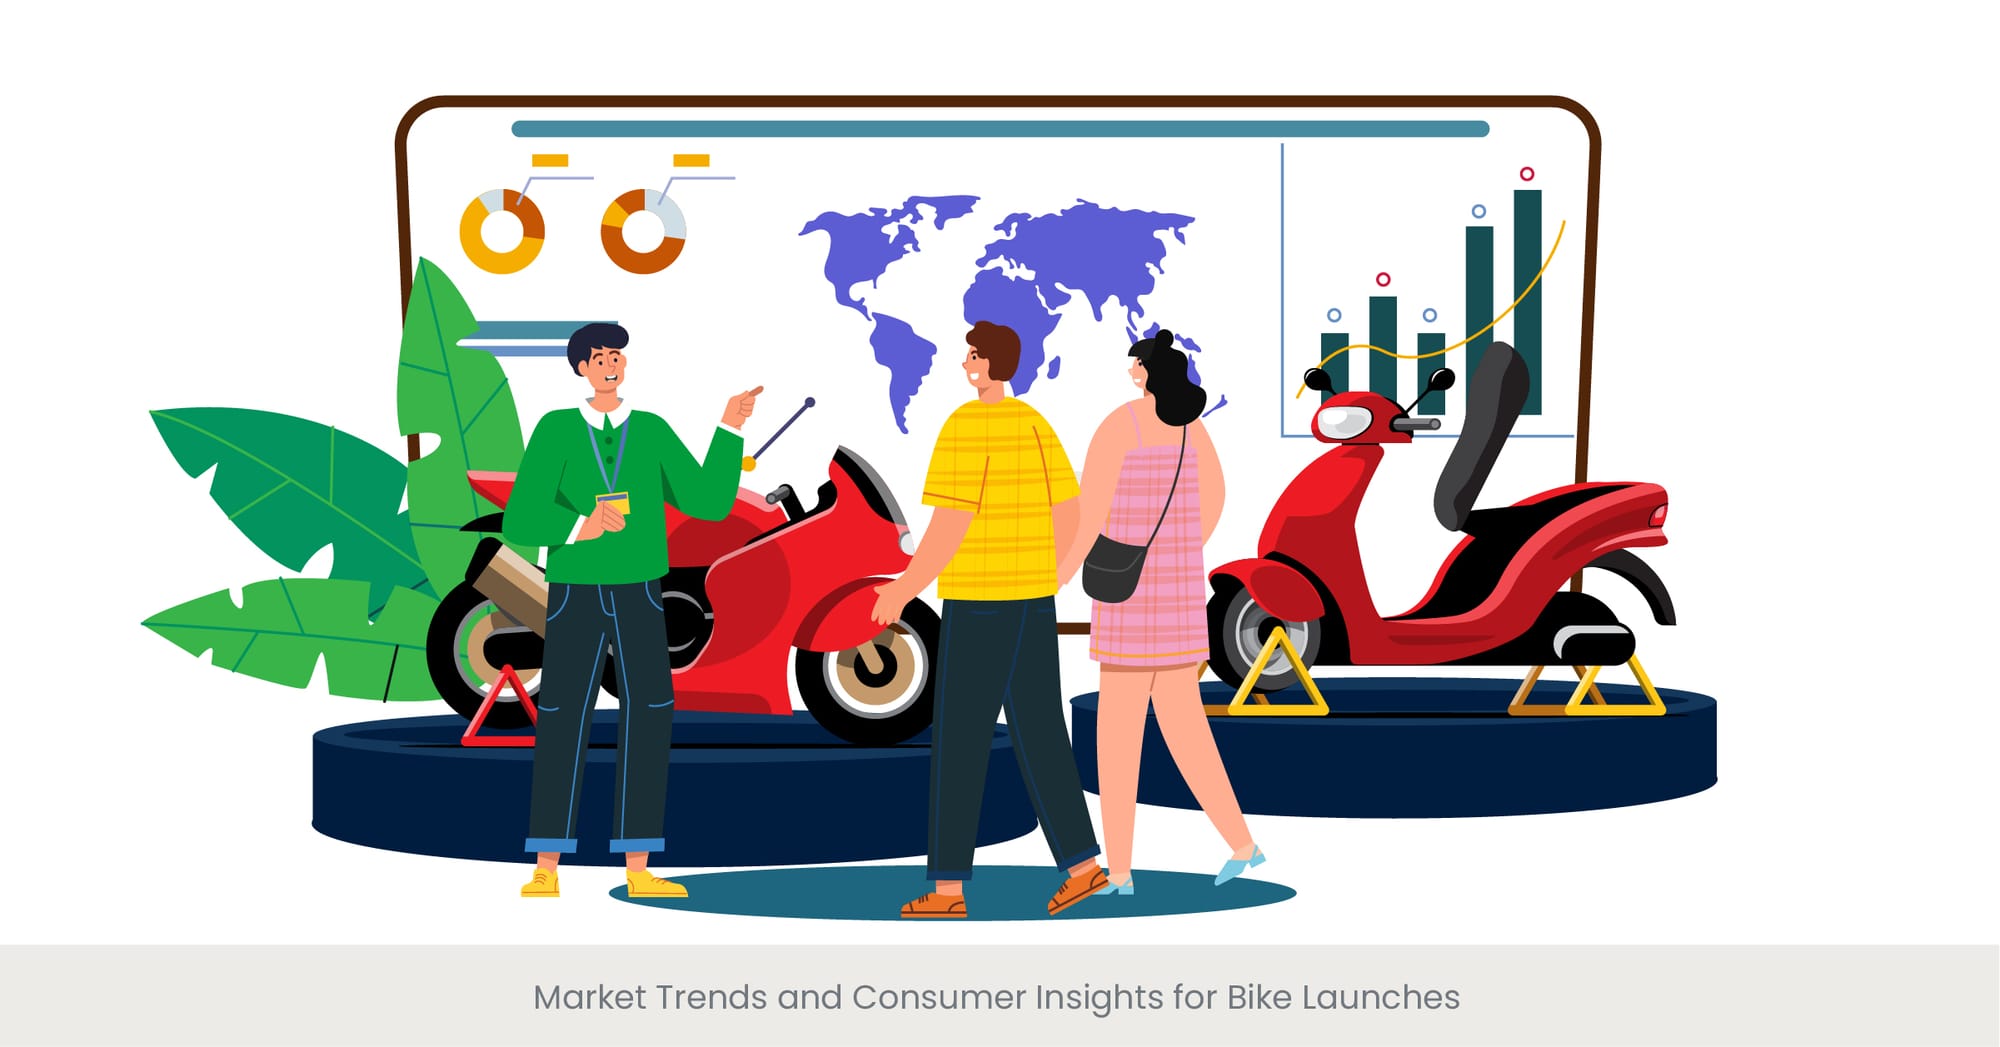 Market Trends and Consumer Insights for Bike Launches